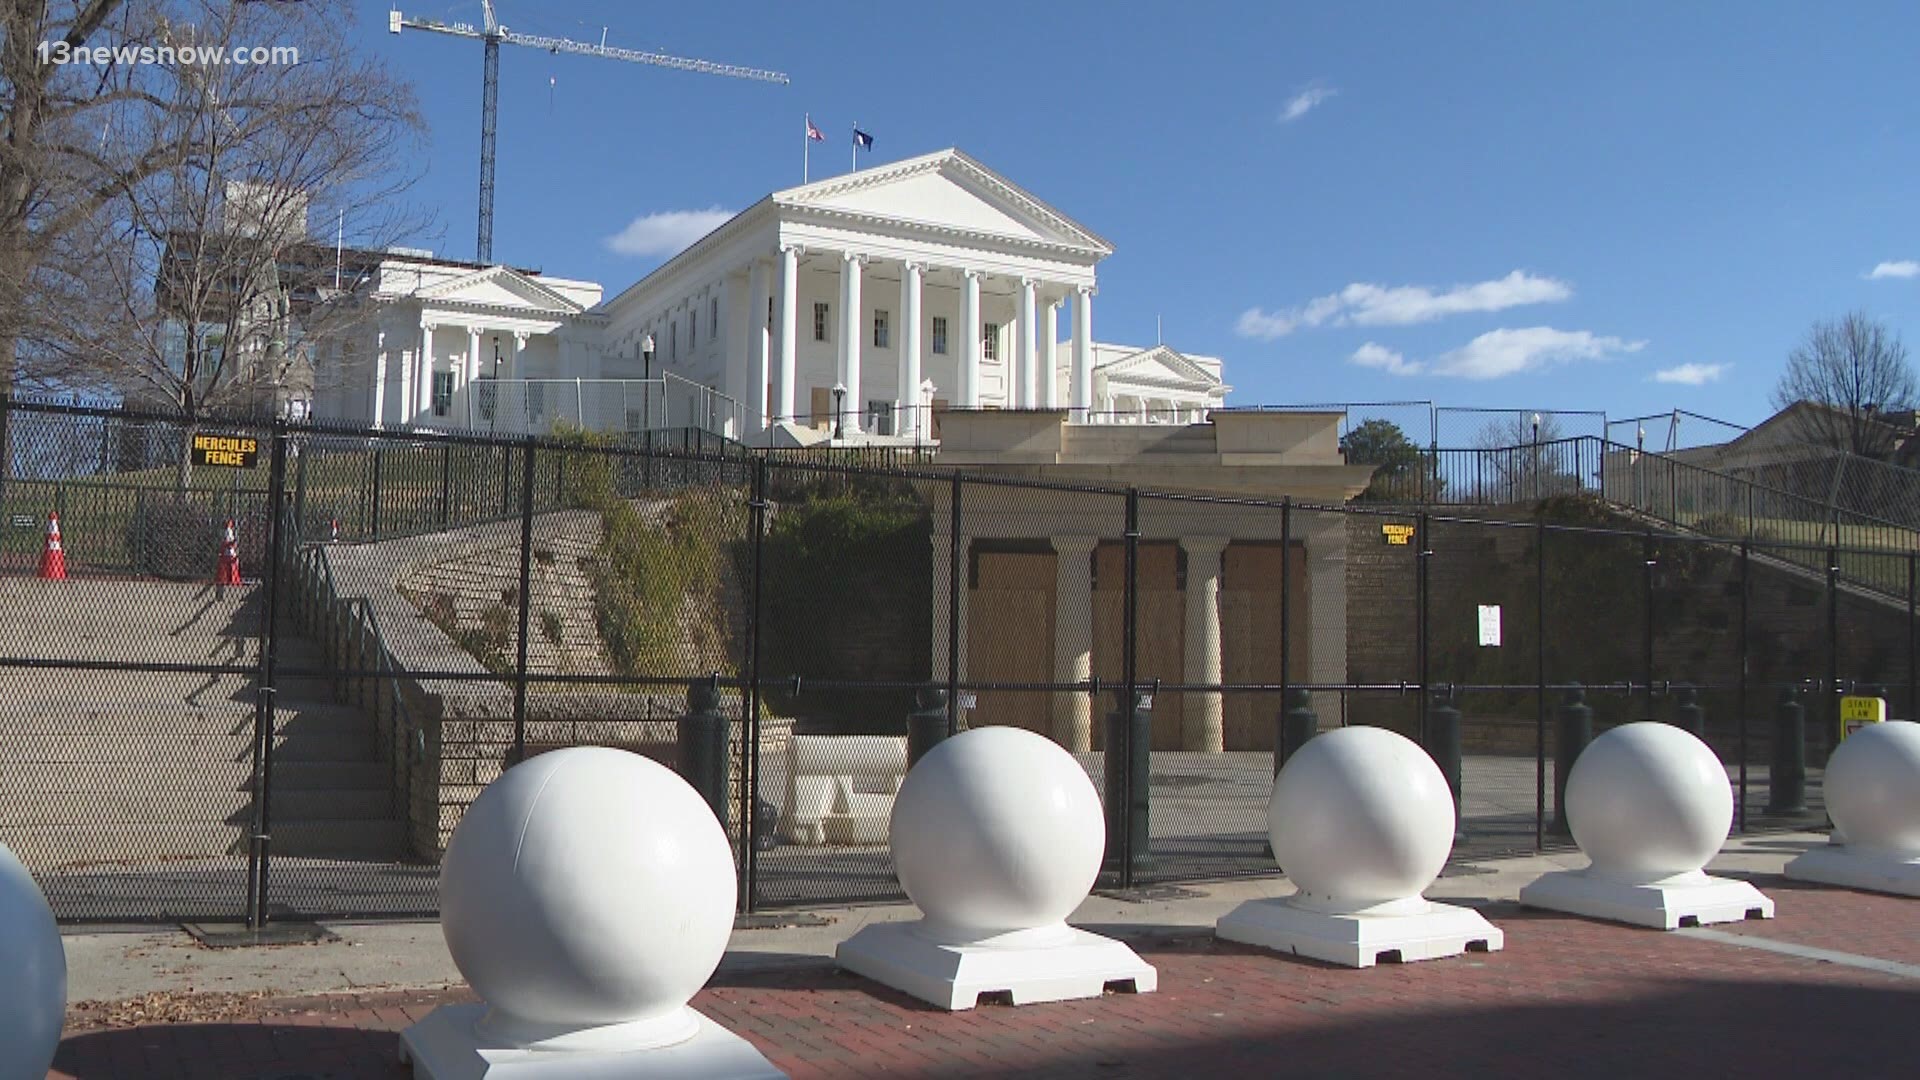 All was quiet at the Virginia State Capitol in Richmond on Inauguration Day, which was closed. 13News Now Evan Watson spoke with people on the transfer of power.